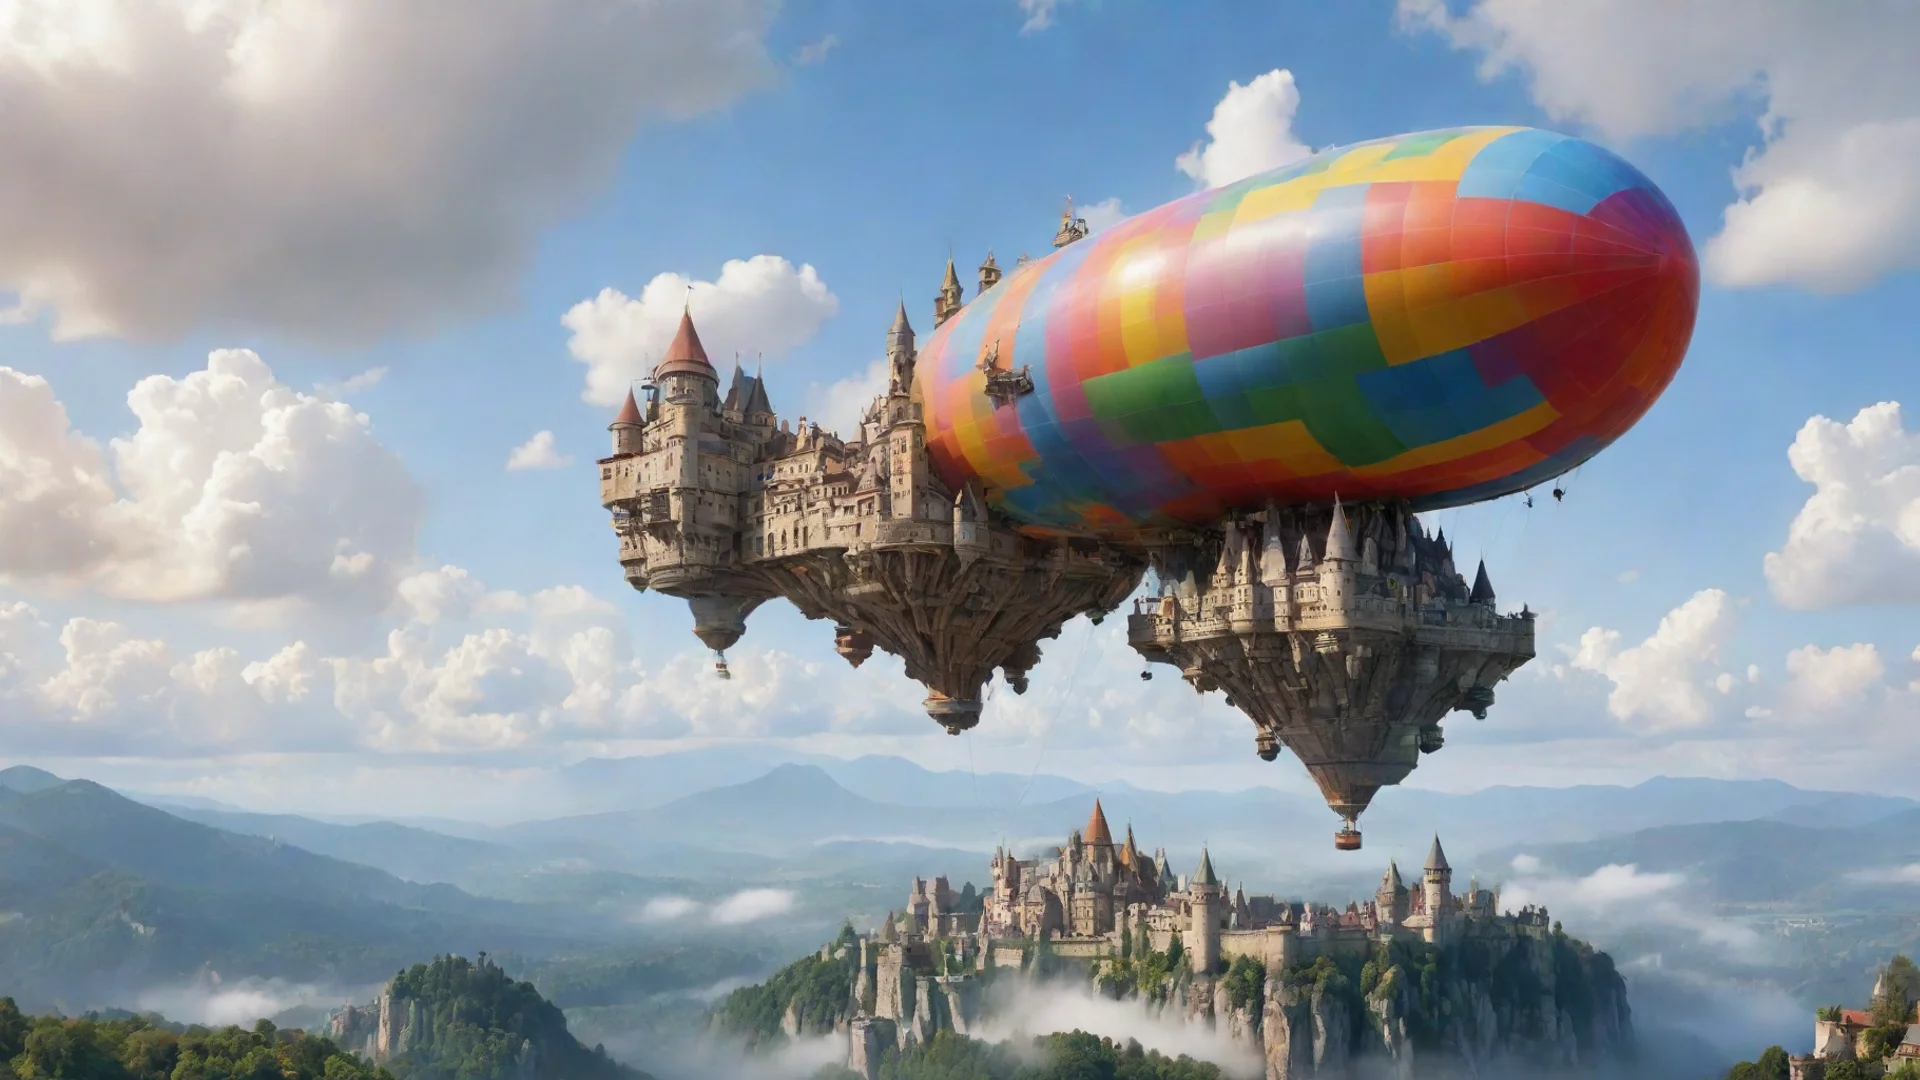 artstation art castle in sky amazing awesome architectural masterpiece wow hd colorful world floating blimp confident engaging wow 3 wide